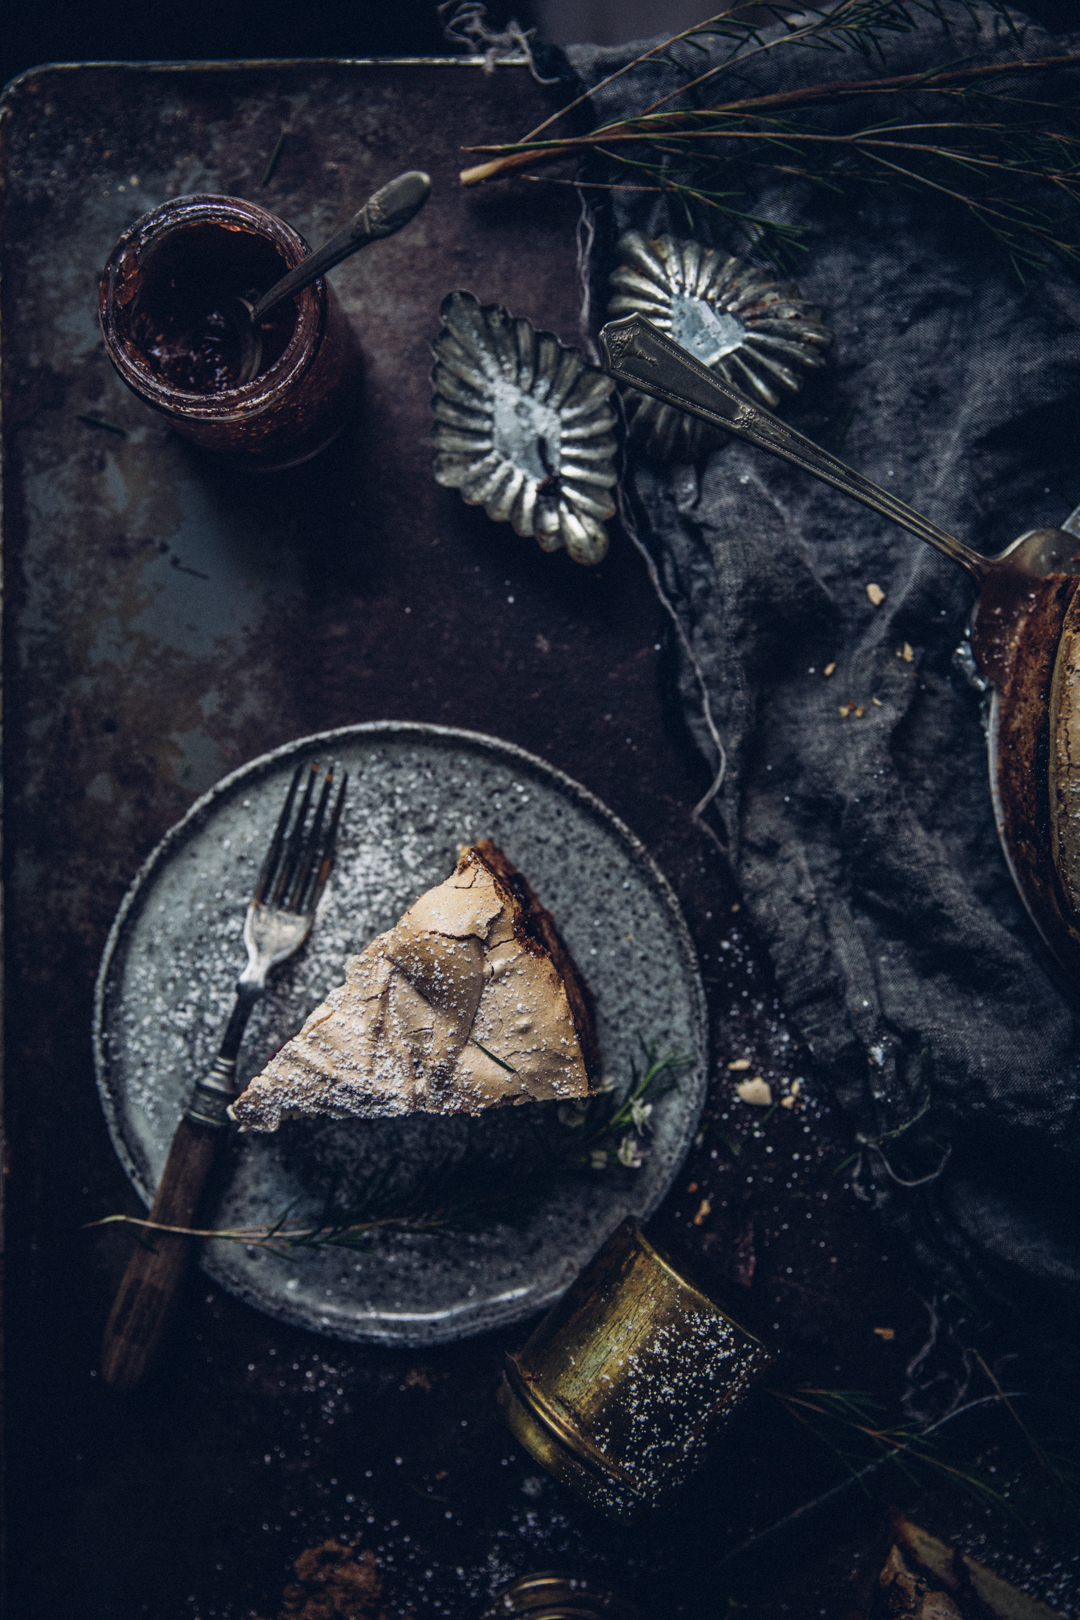 winter-nordic-cake-with-a-rhubarb-black-current-rose-jam-photography-styling-by-christiannkoepke-com-21